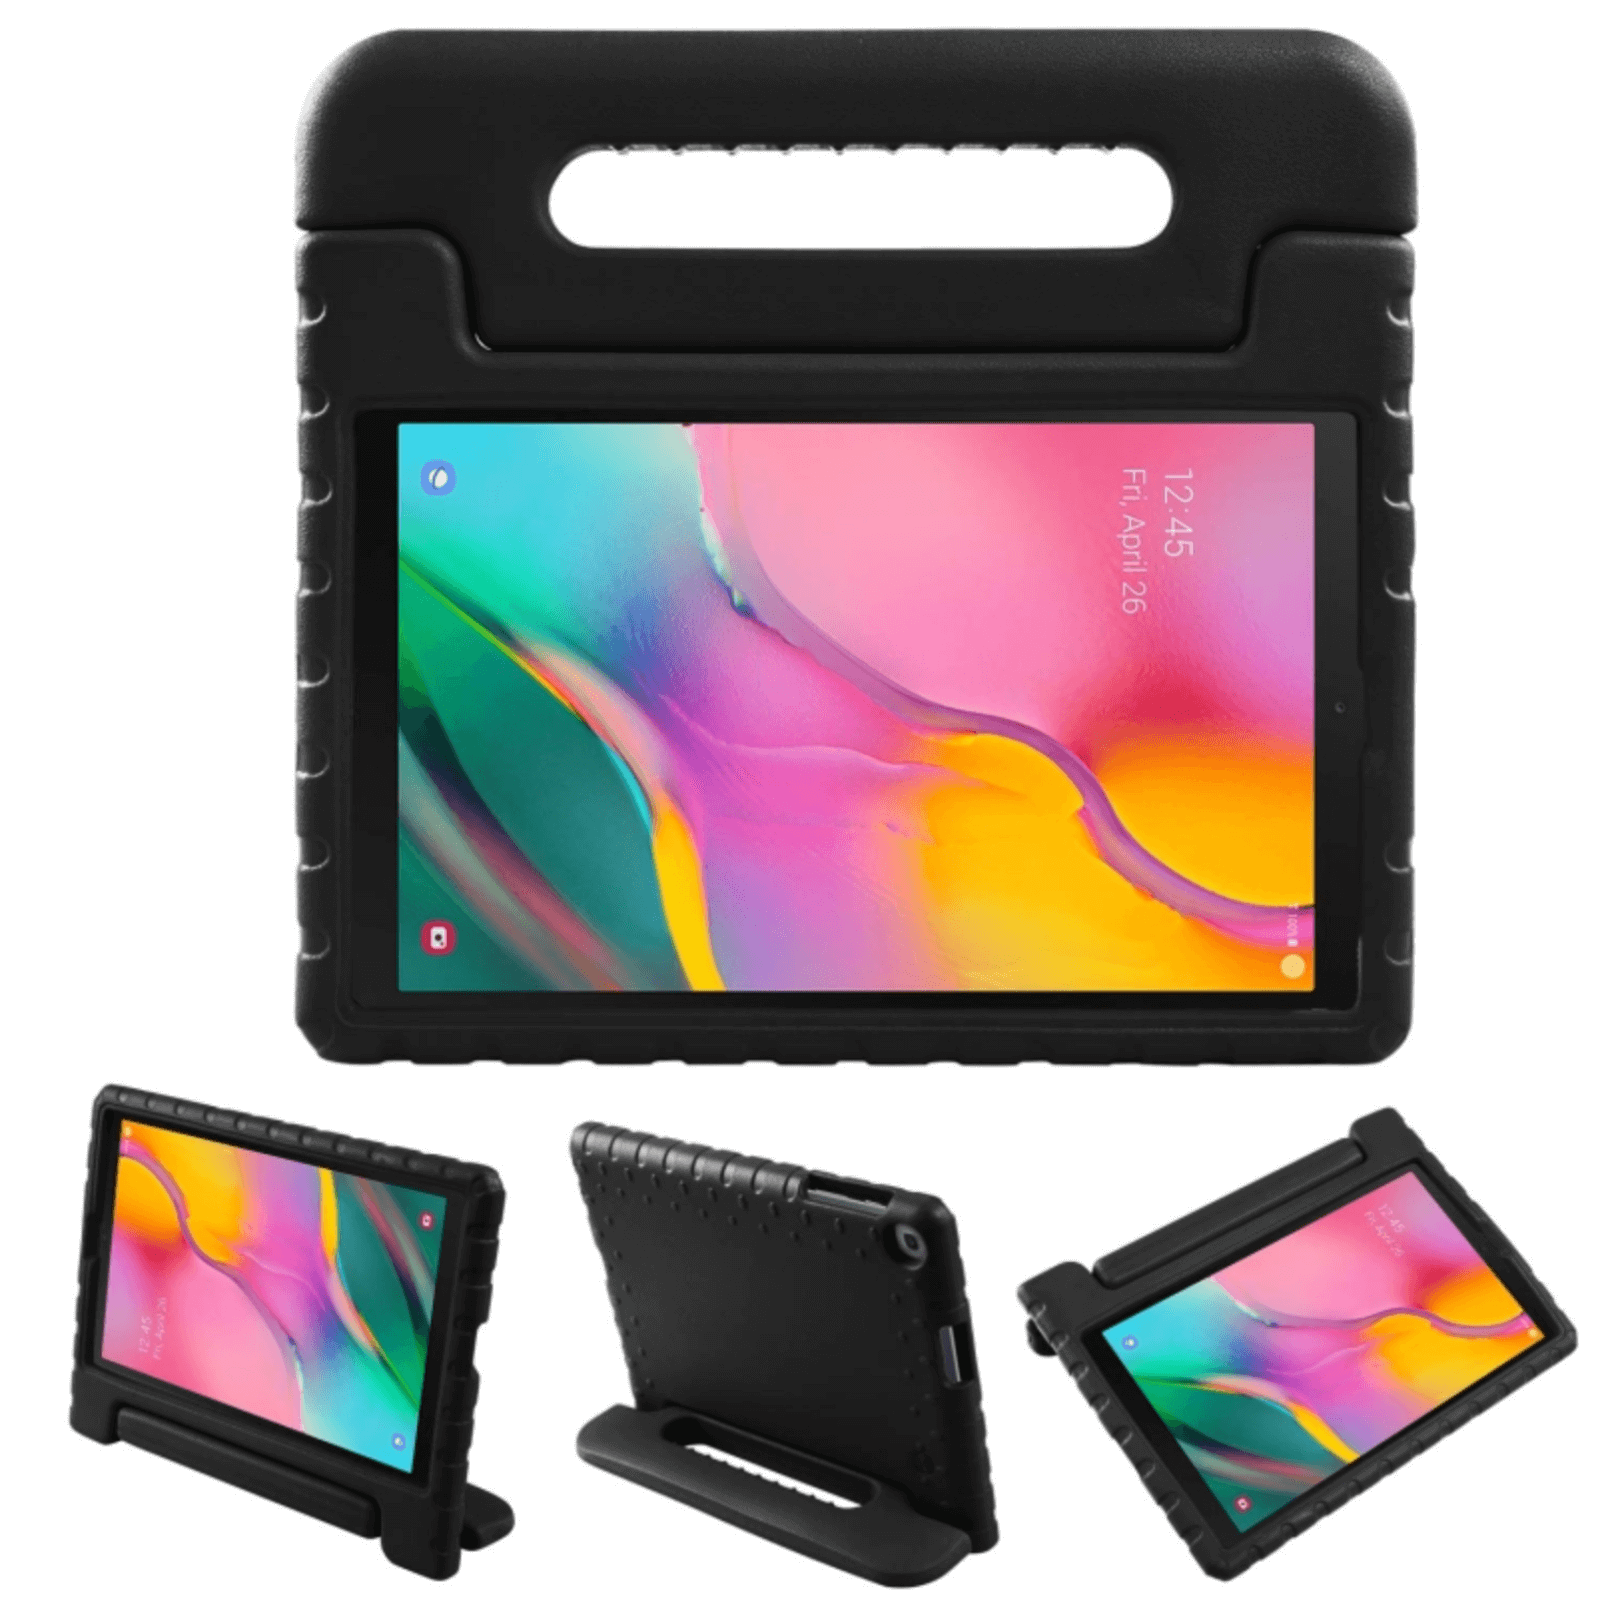 For Samsung Galaxy Tab A 8.0" 2019 Kids Case Shockproof Cover With Stand Black